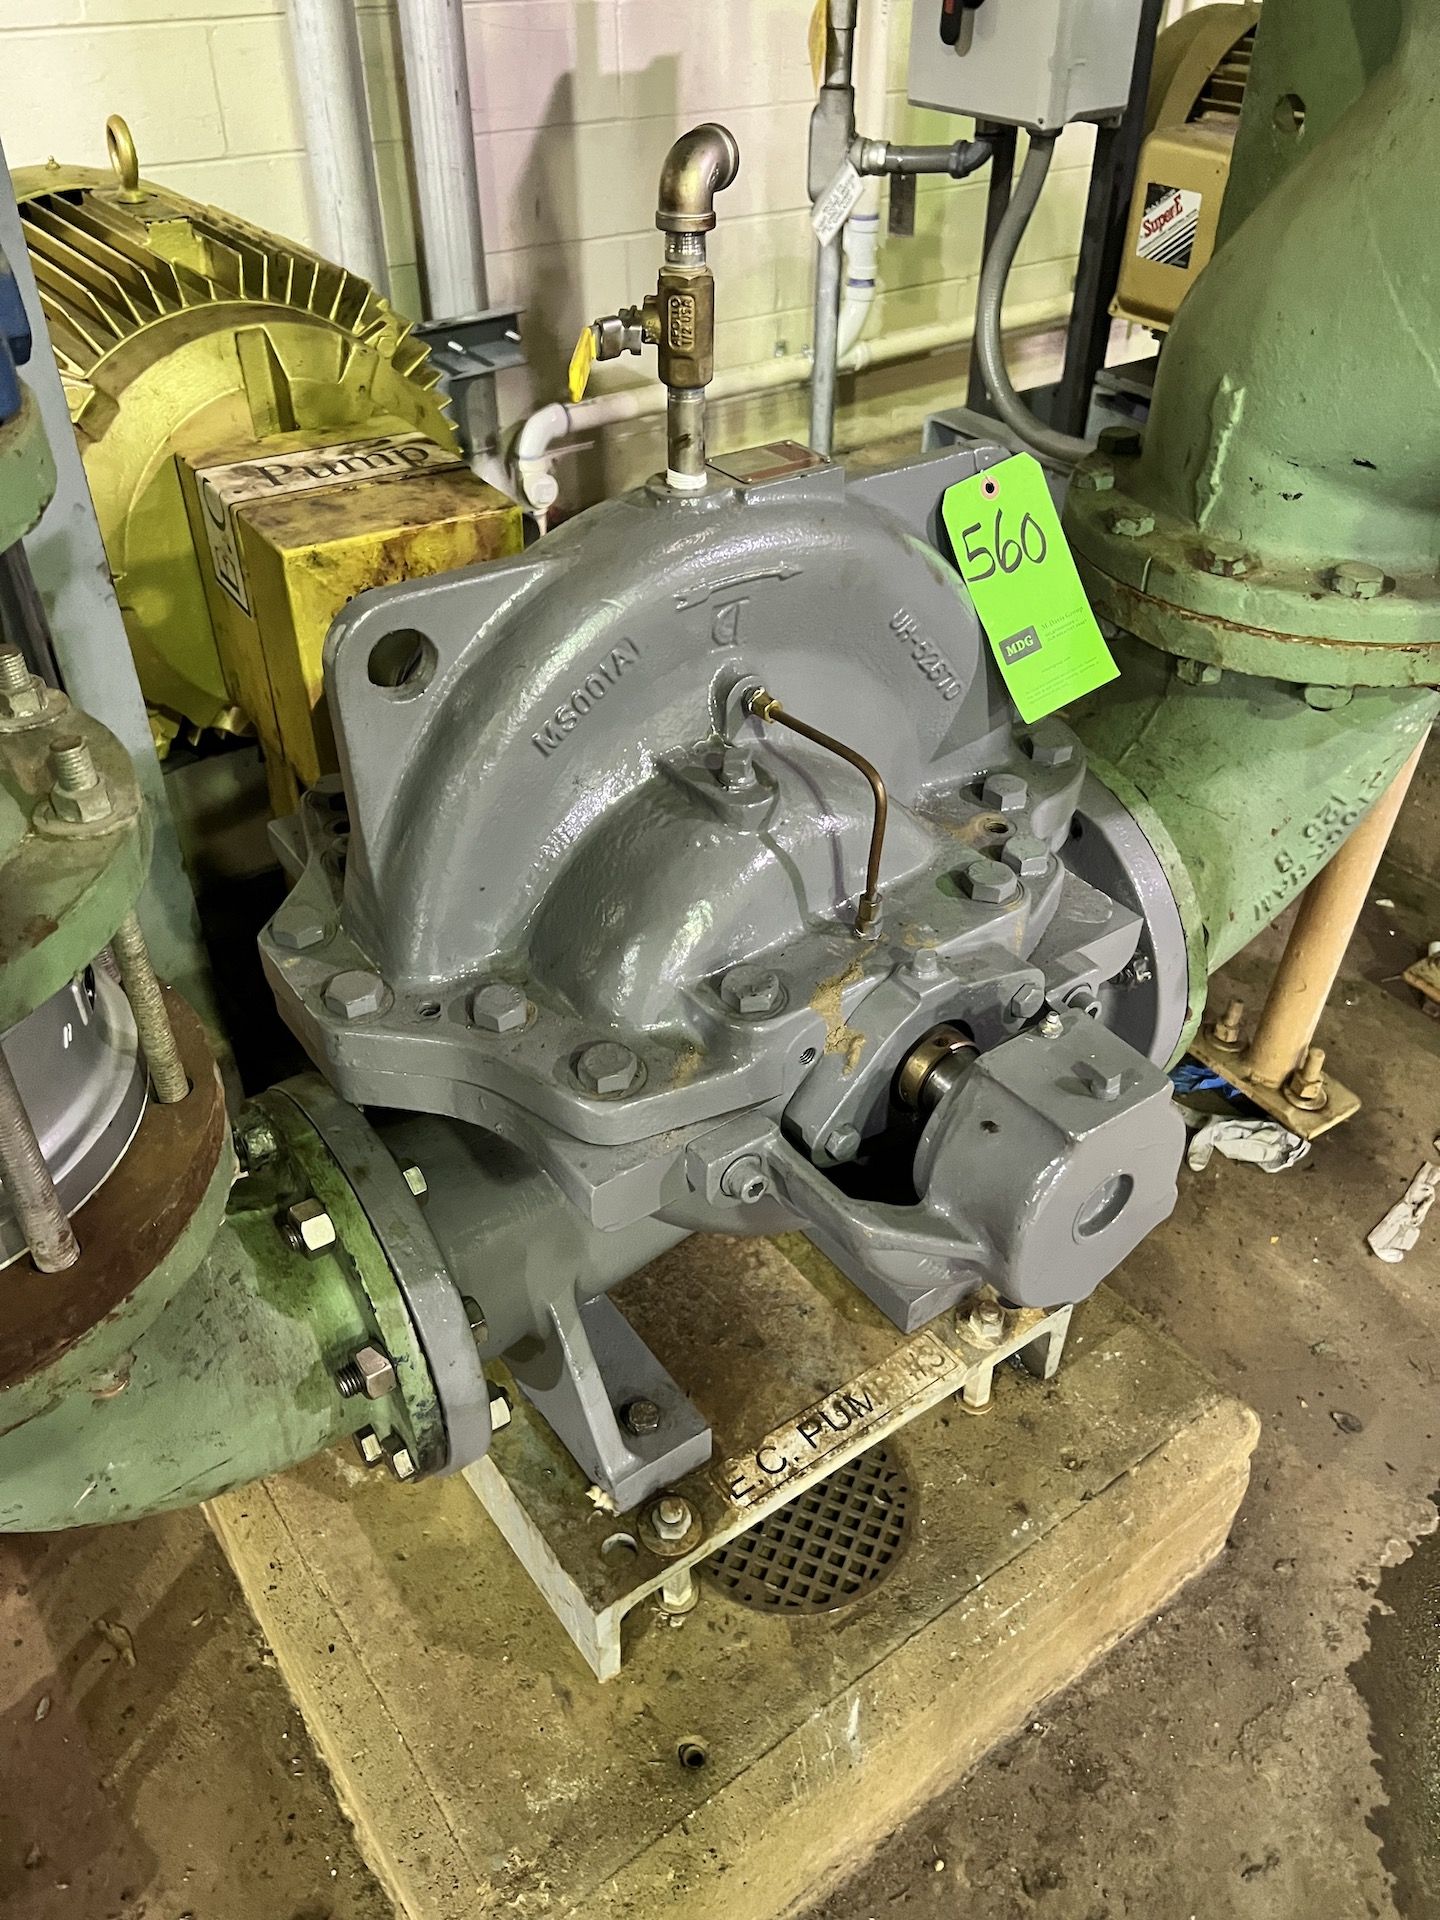 2022 FLOWSERVE SINGLE CASE AXIALLY SPLIT CENTRIFUGAL PUMP, MODEL 6LR-13A/12.75 SF, 175 PSI @ 100 - Image 3 of 10